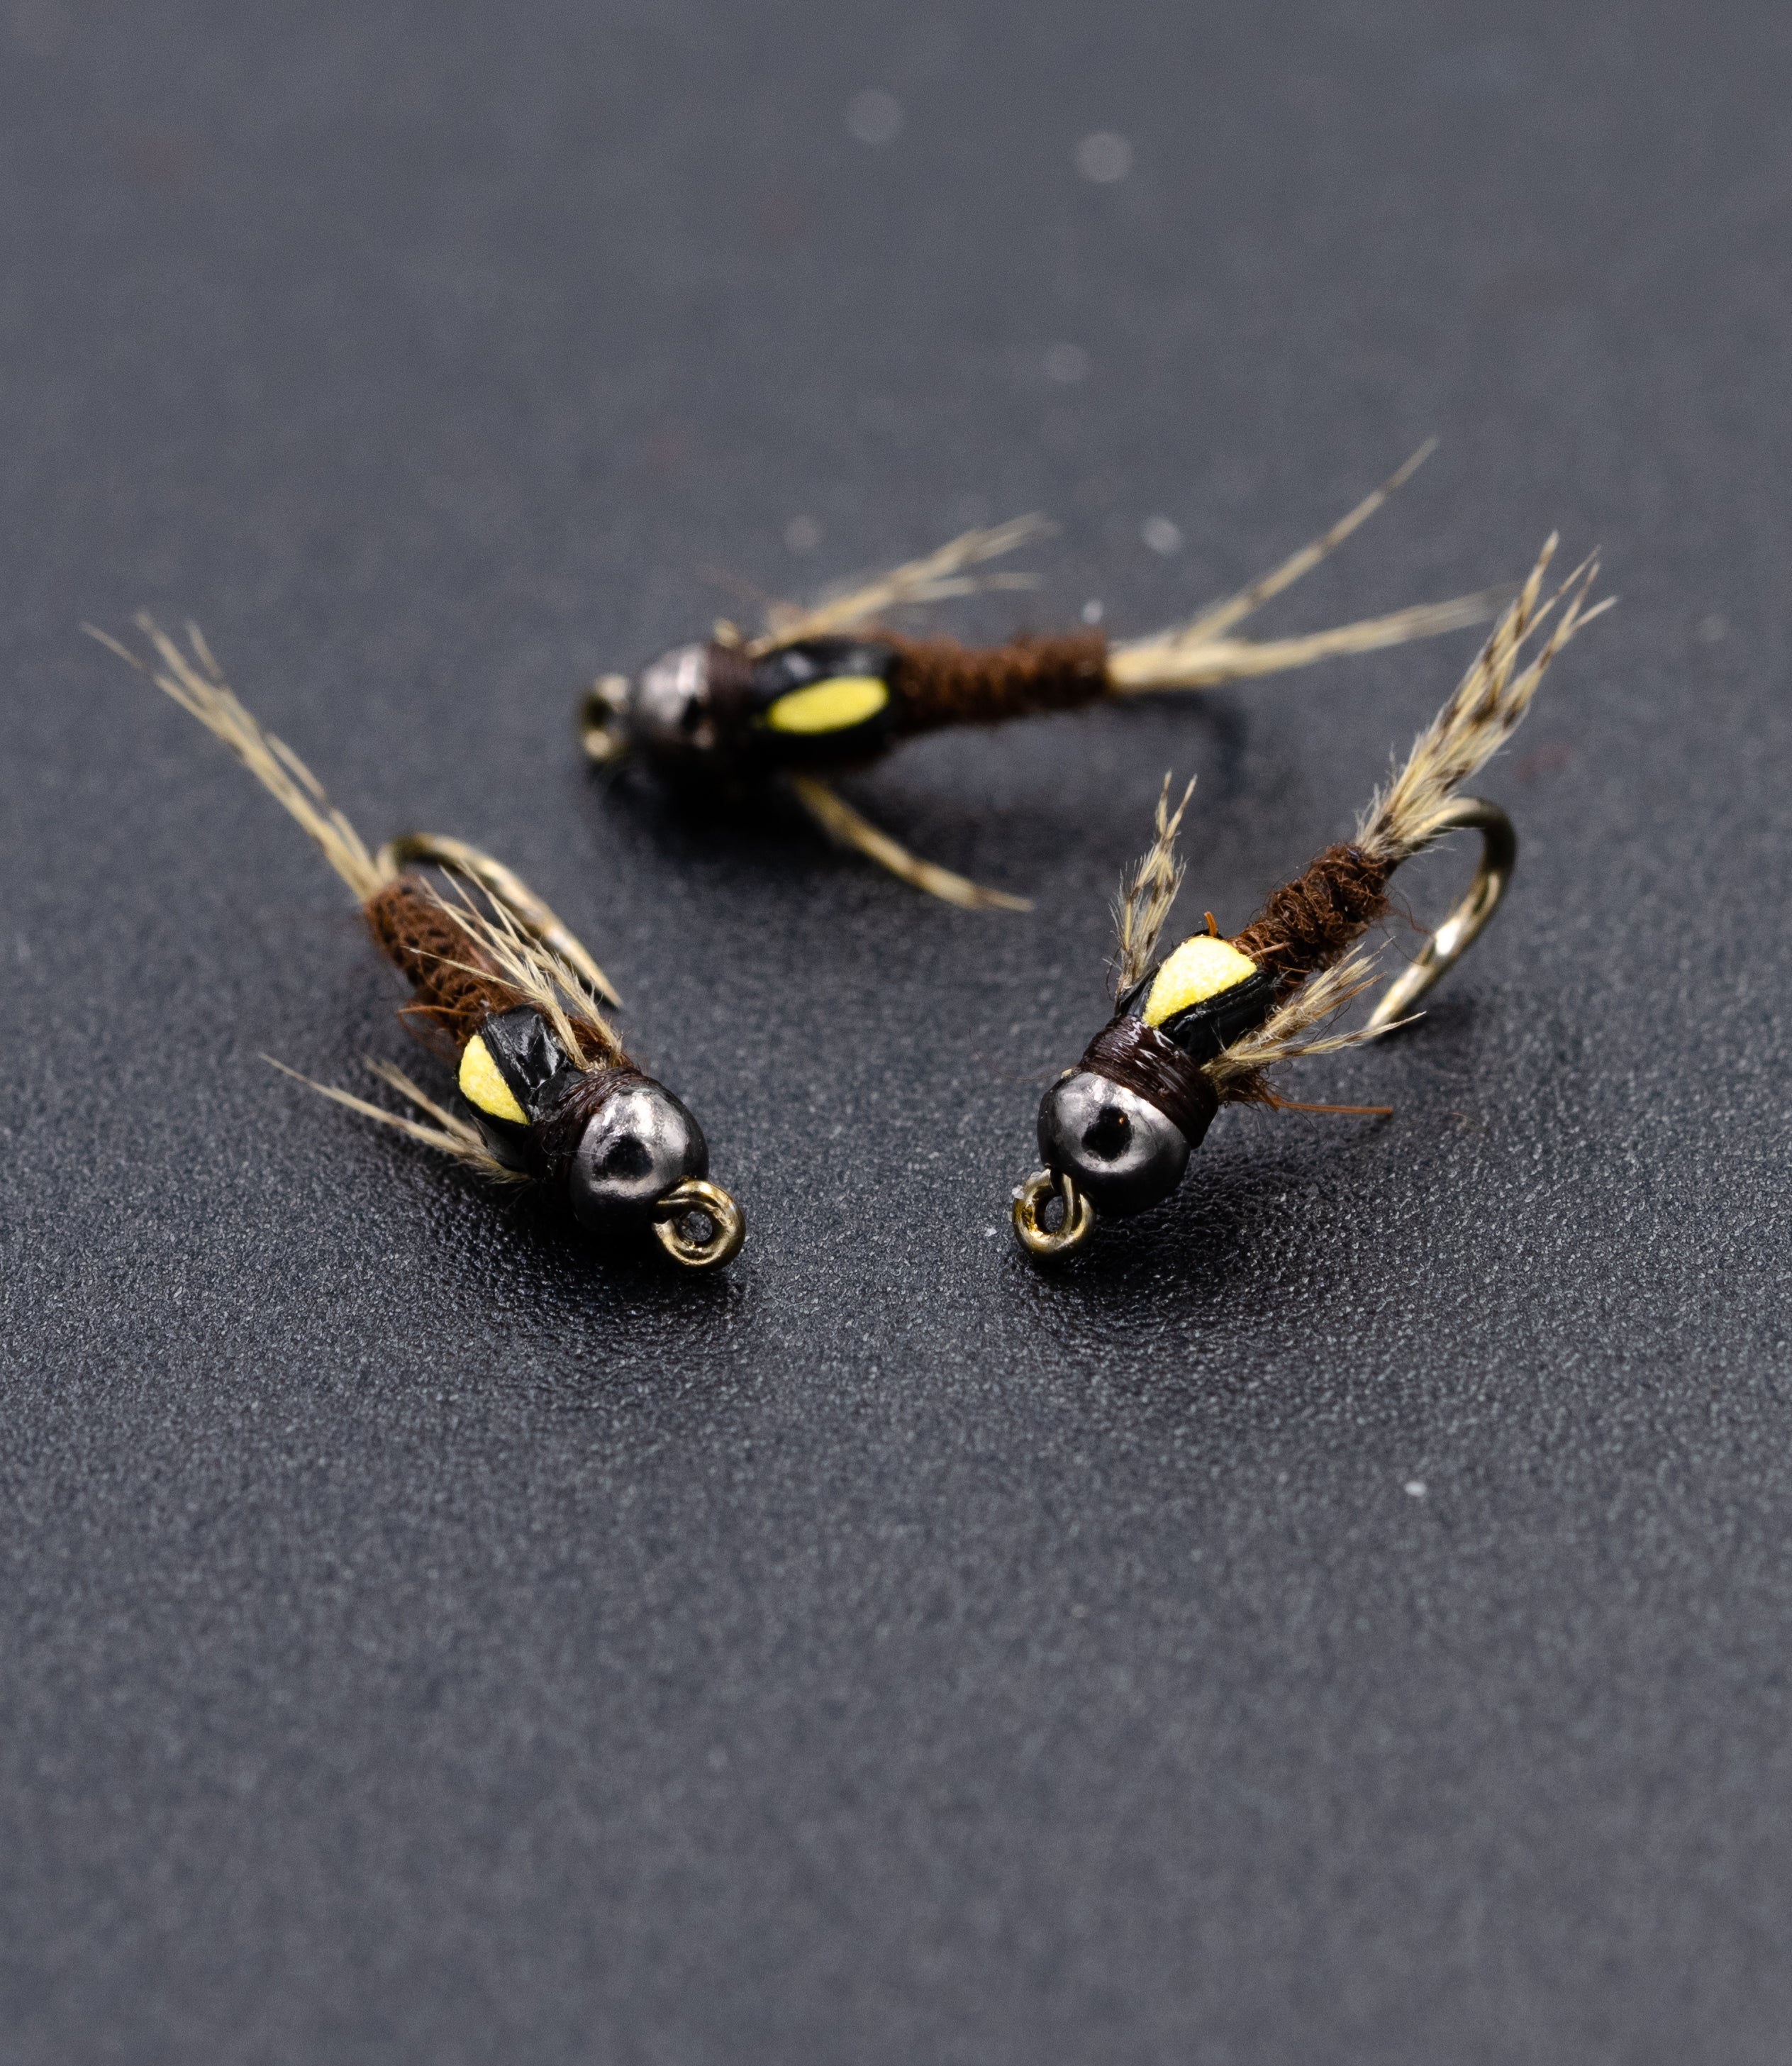 Split Case PMD Nymph – Fly Fish Food